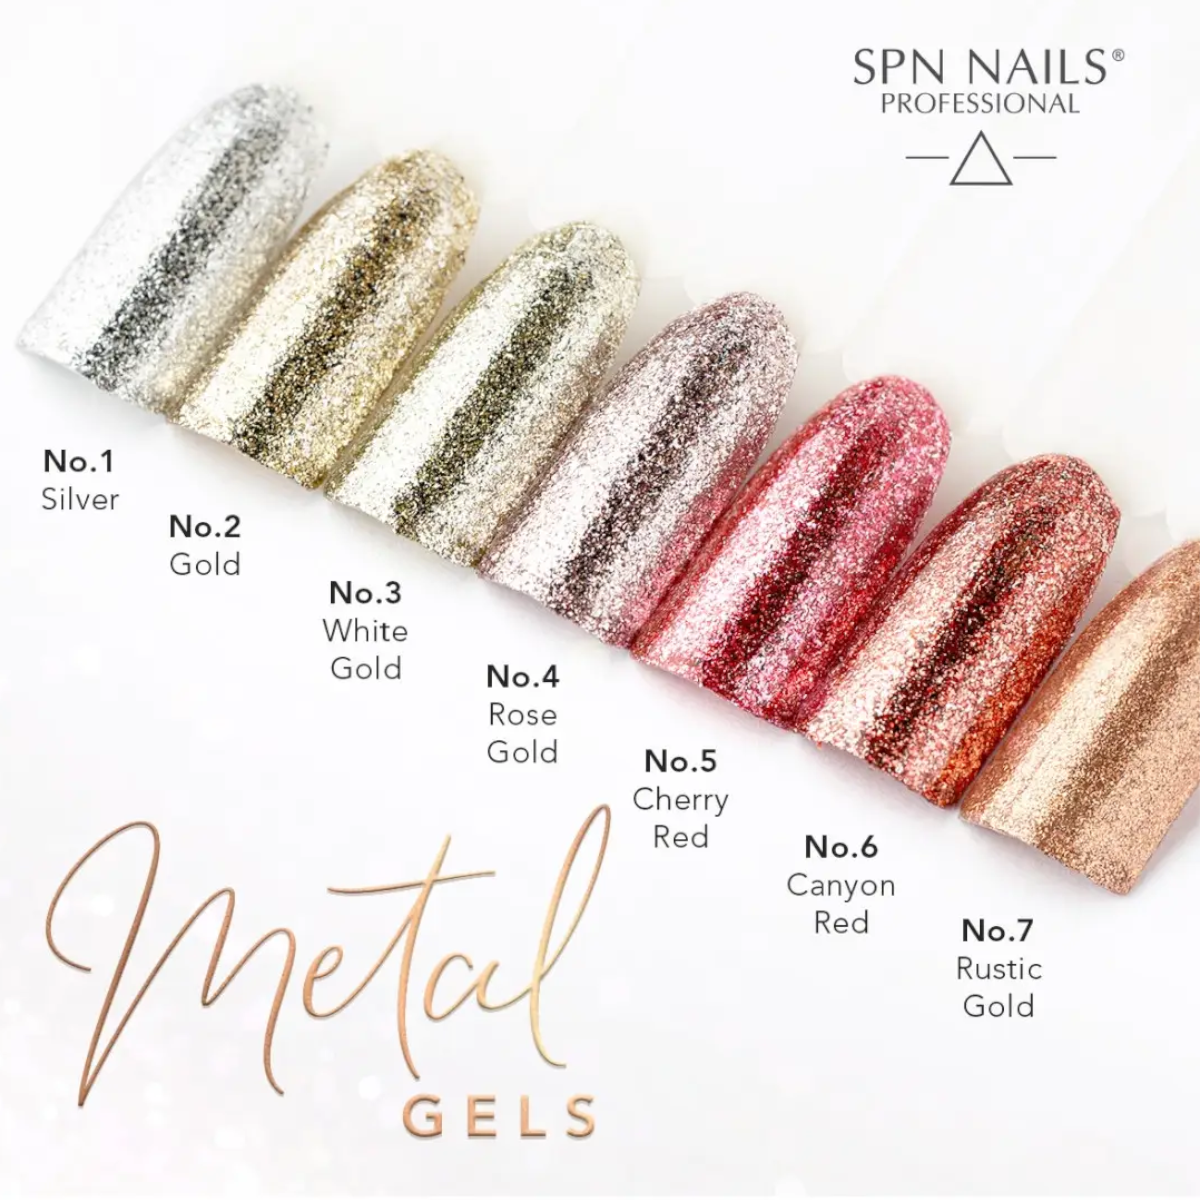 SPN Nails Metal Gel No.1 Silver Glitter Collection